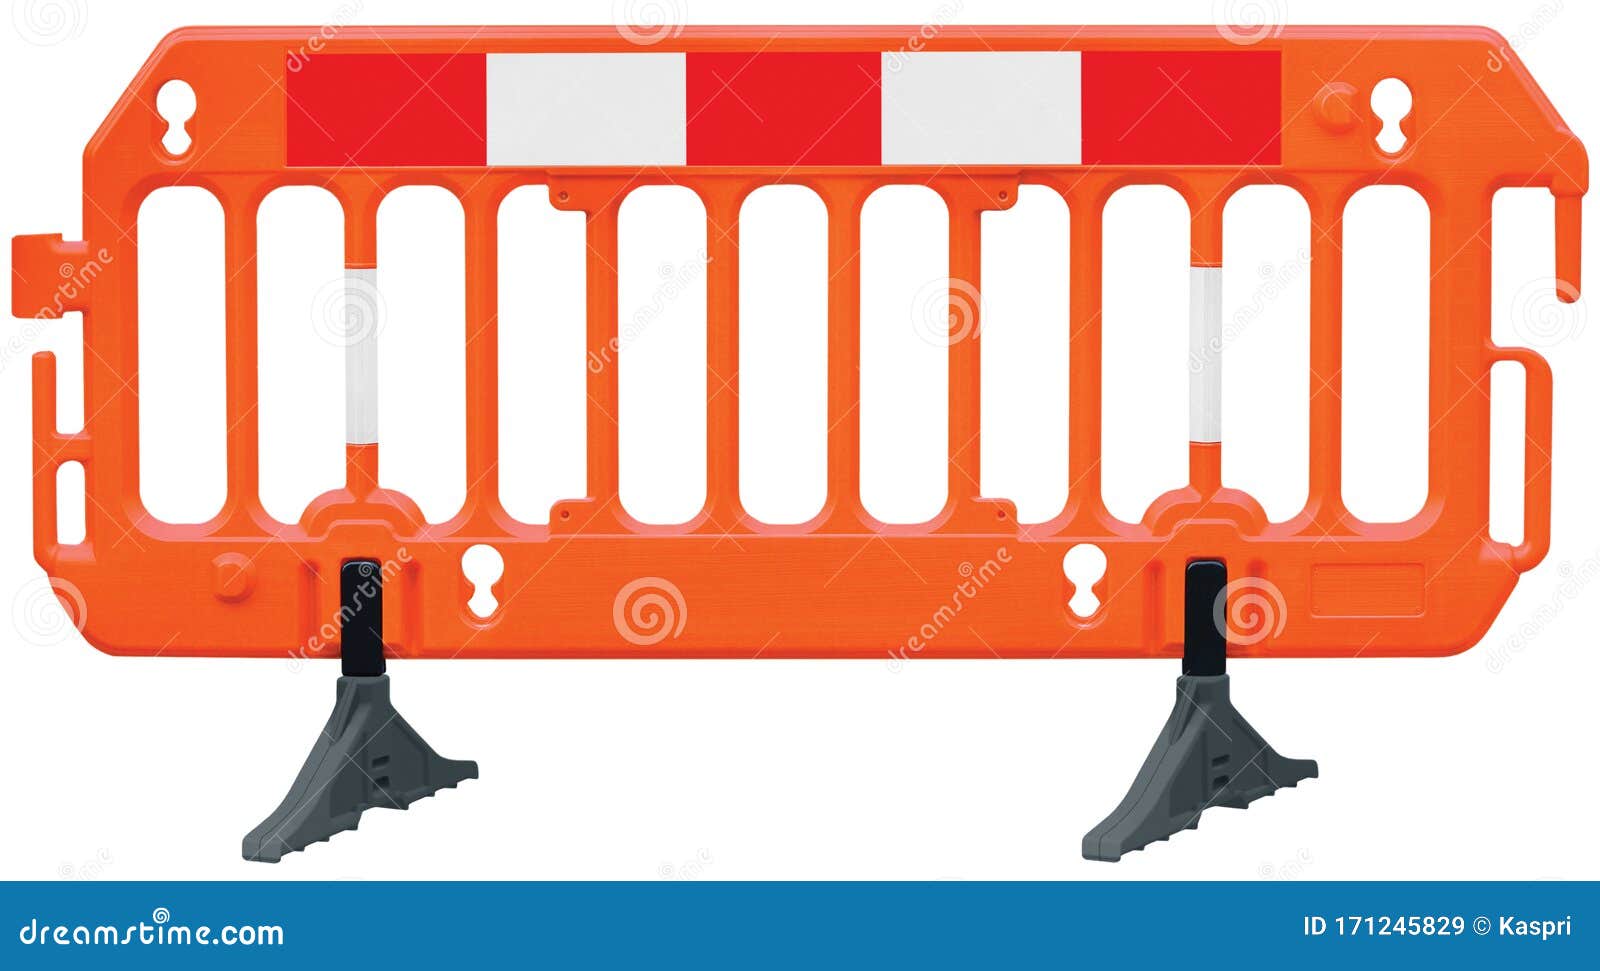 obstacle detour road barrier fence roadworks barricade orange red and white luminescent stop signal sign seamless  closeup